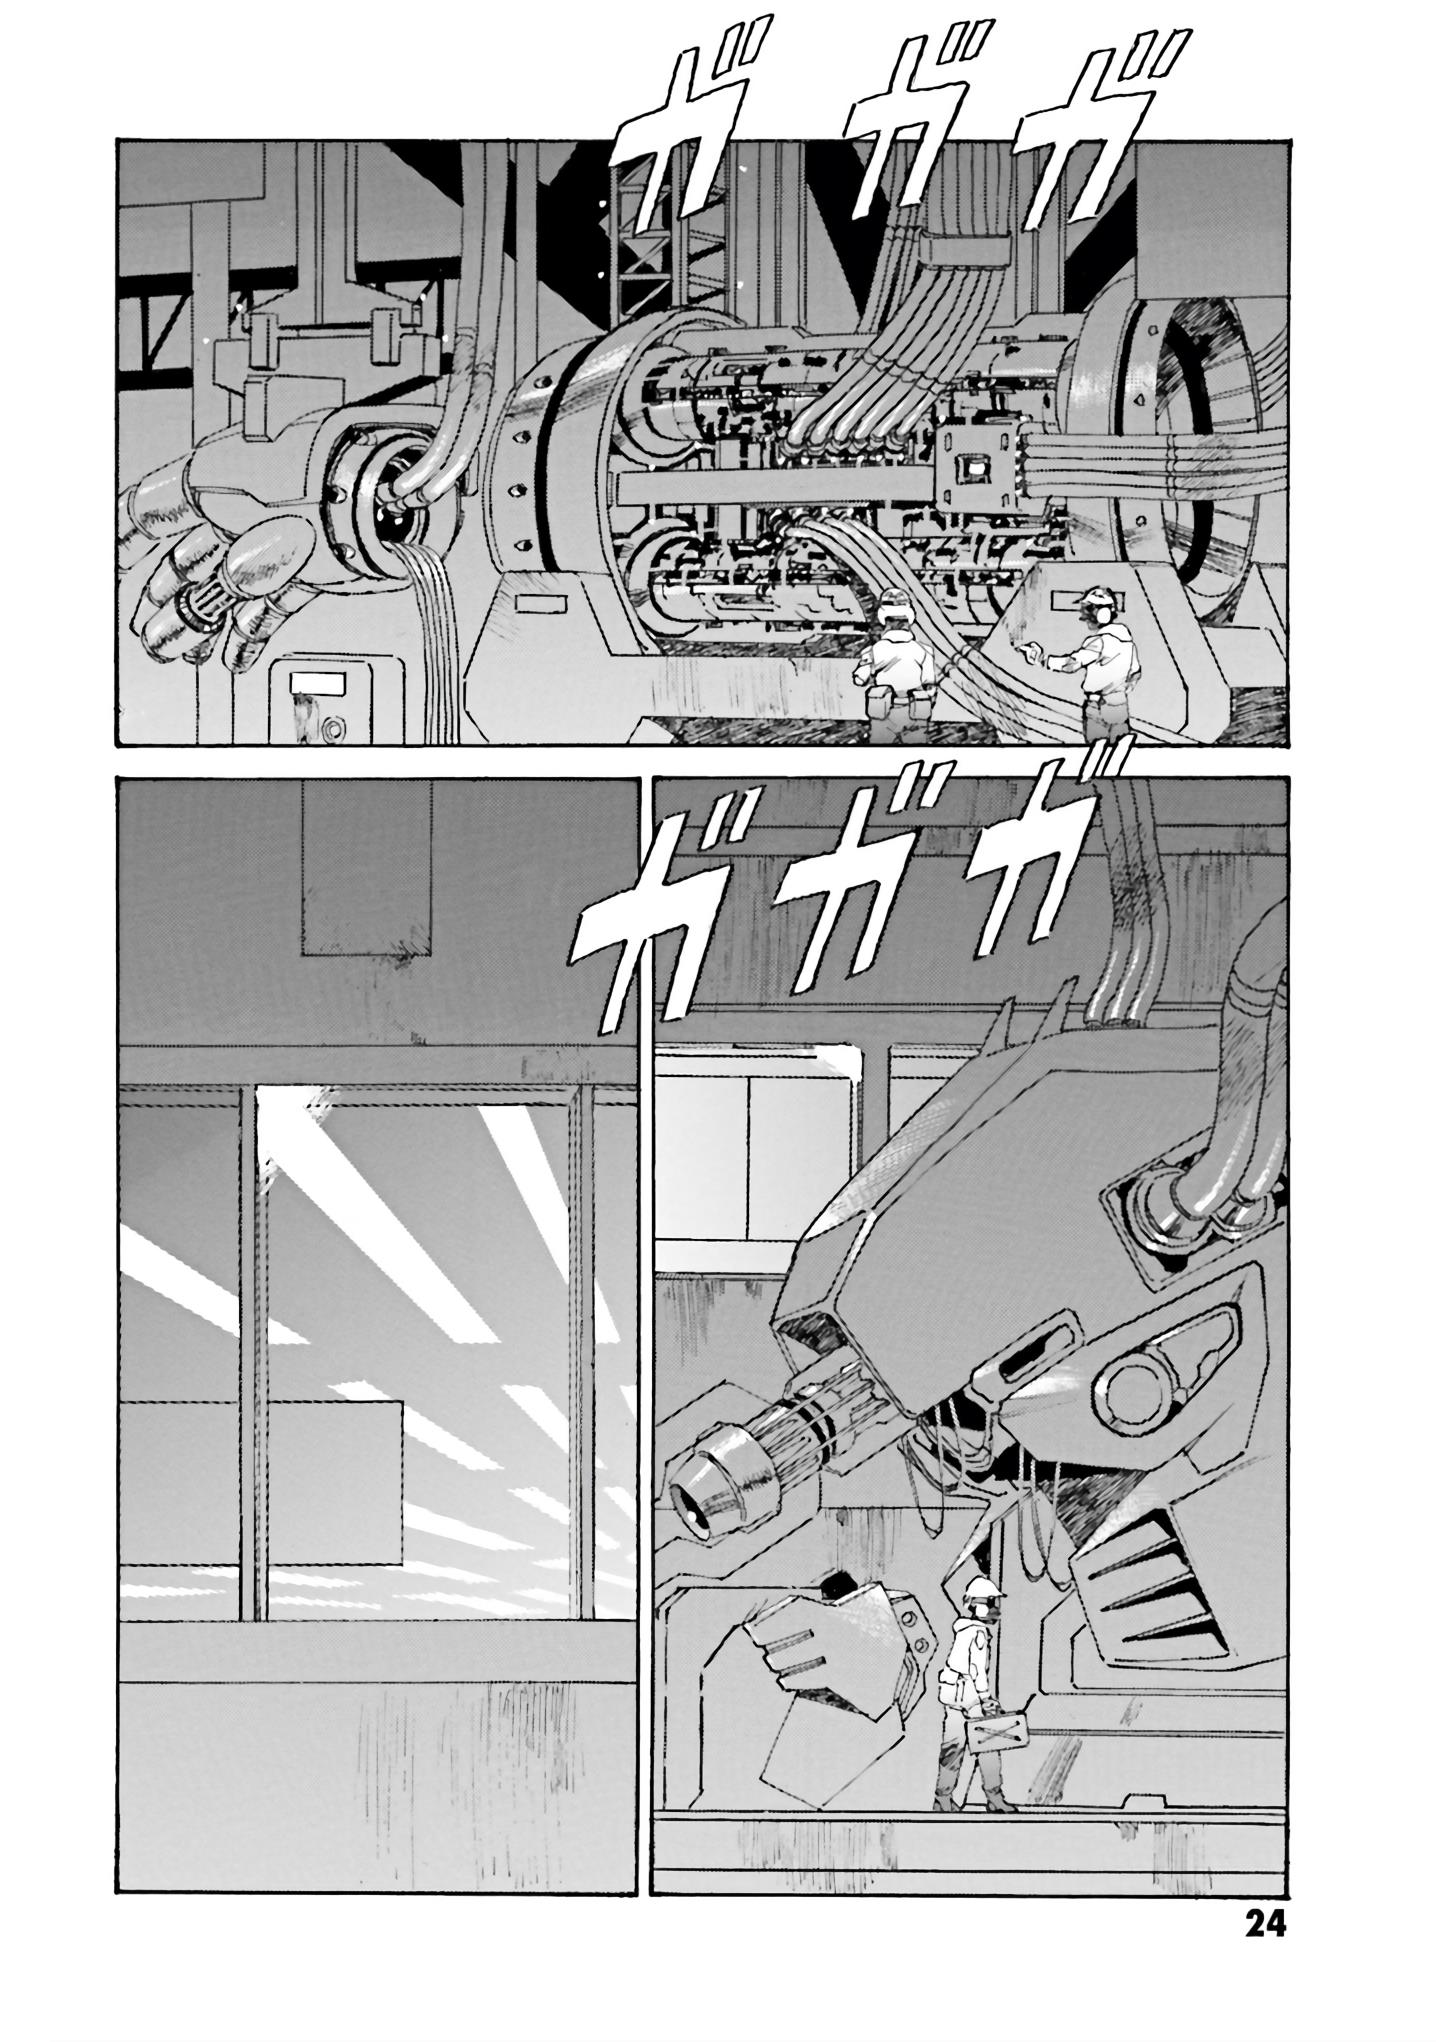 Mobile Suit Gundam: The Revival Of Zeon - Remnant One Vol.1 Chapter 2: Start Up - Picture 2